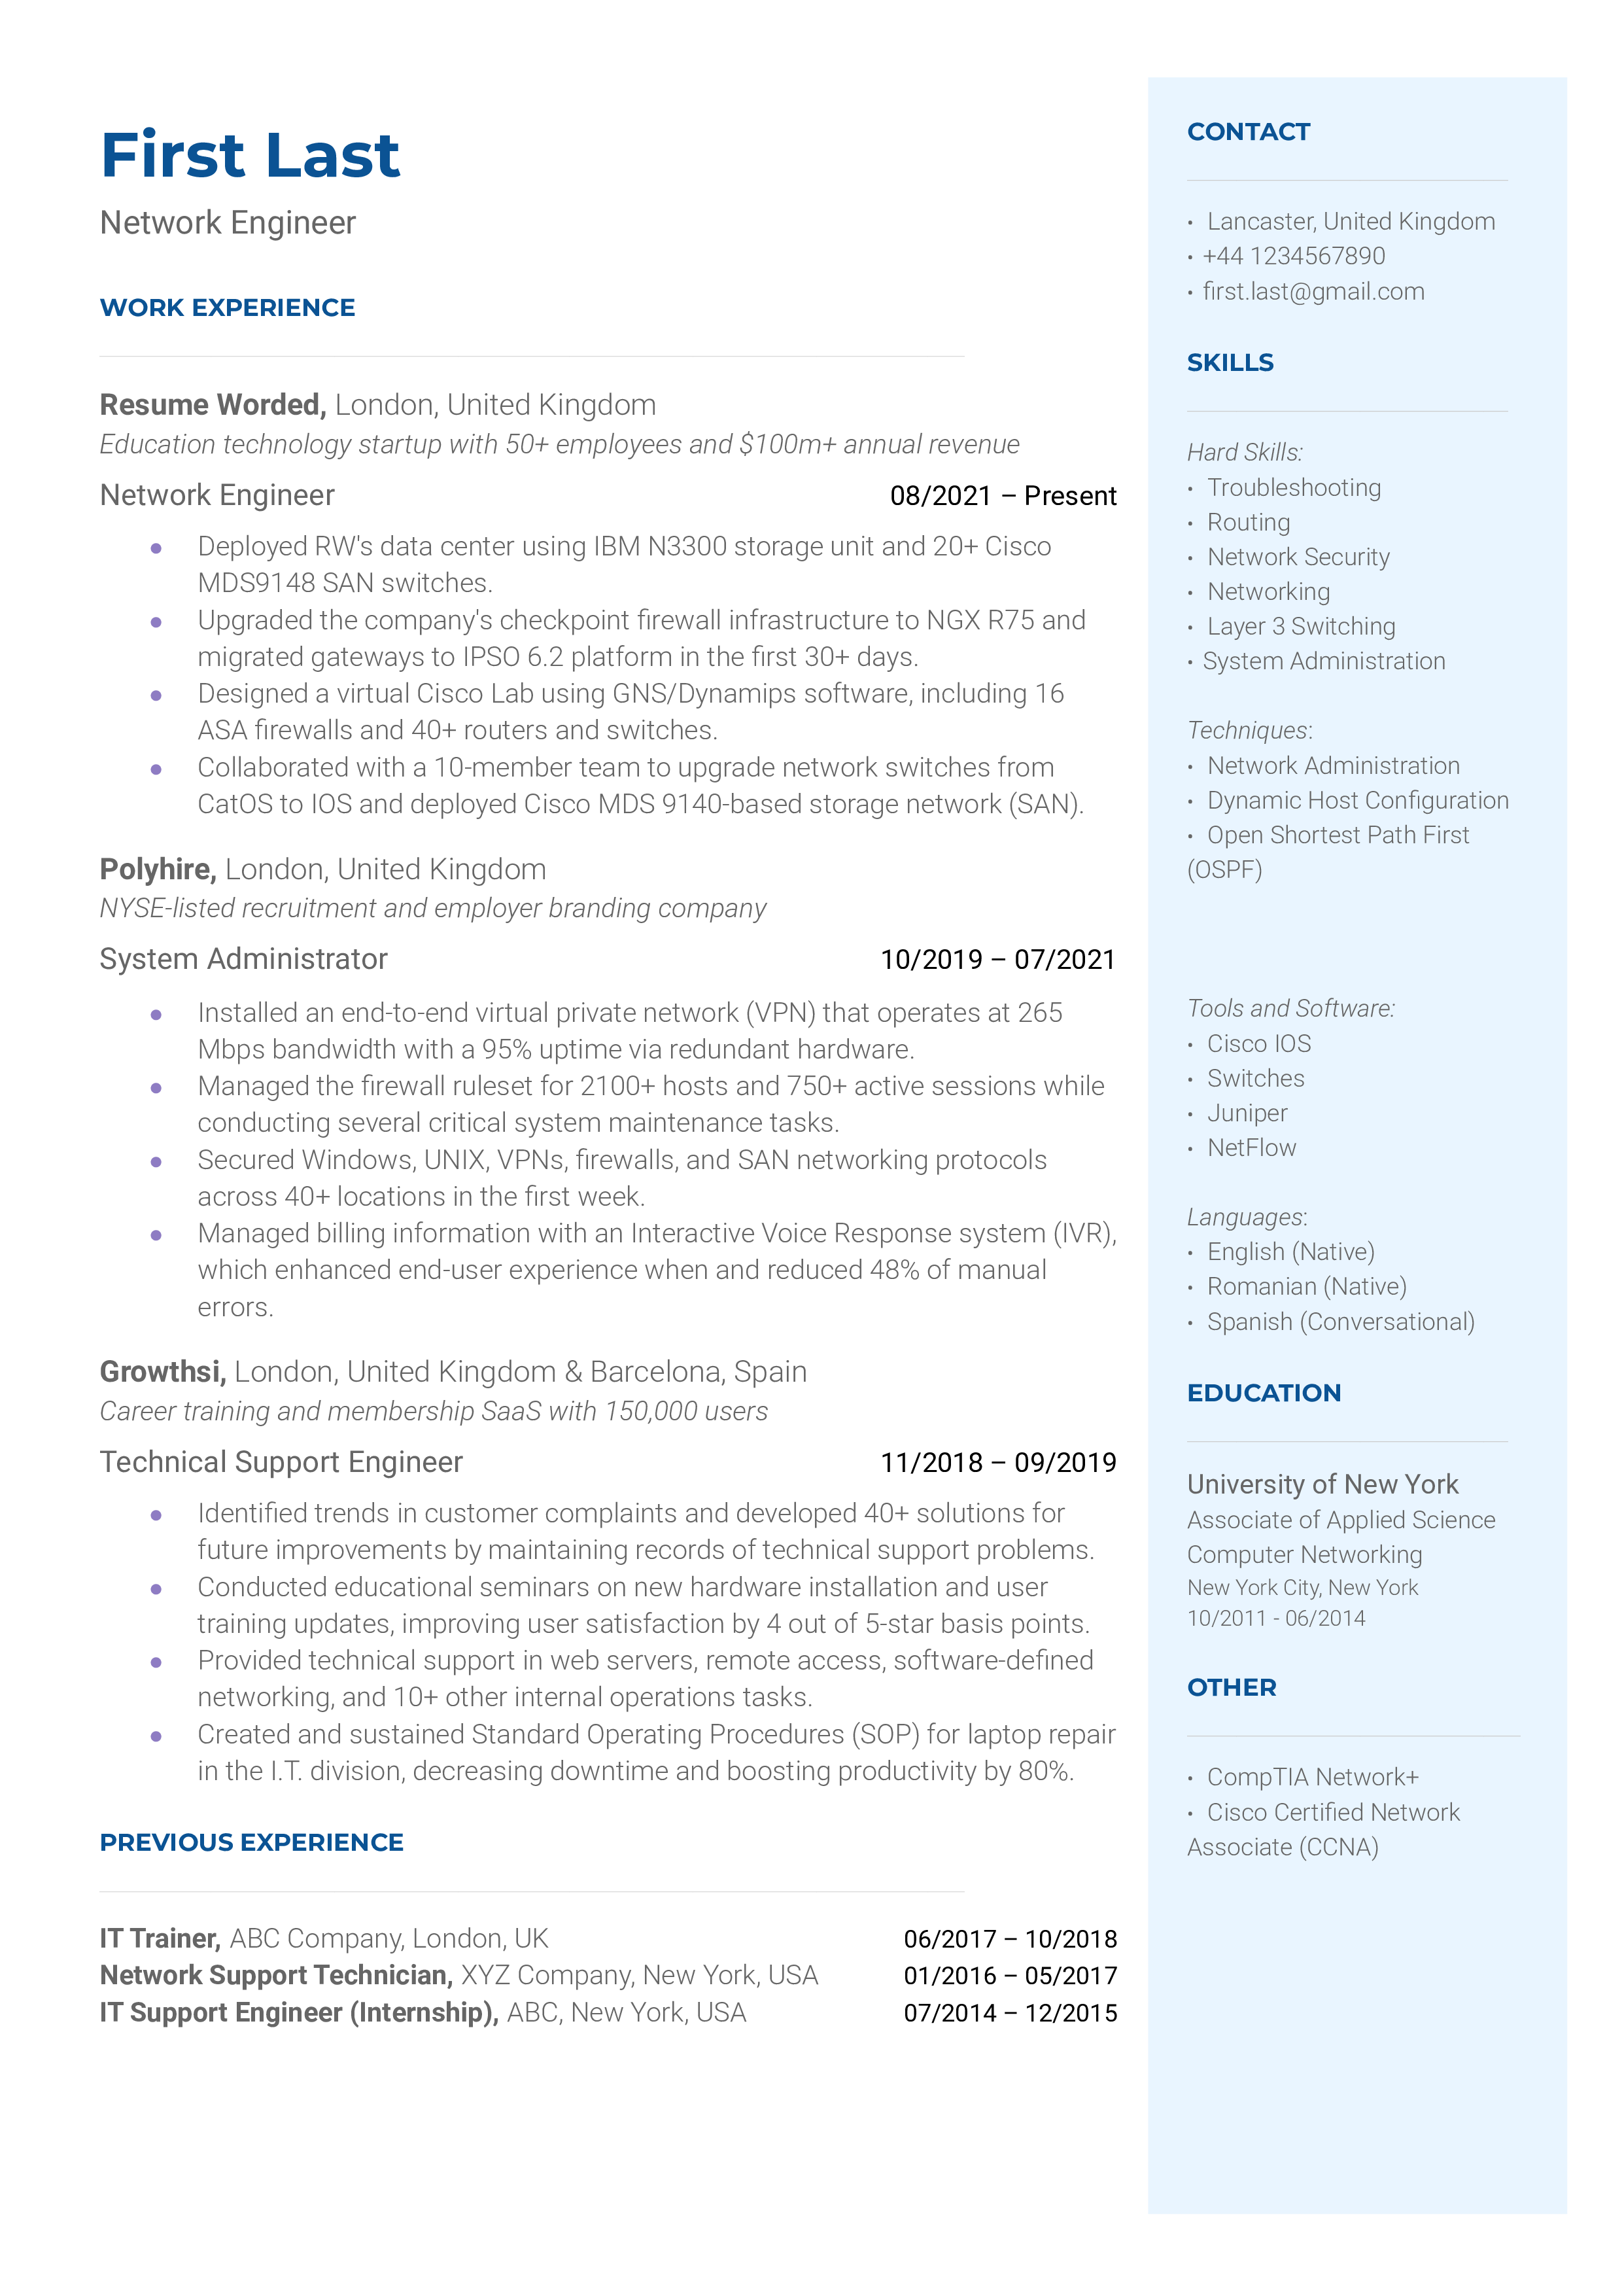 A network engineer resume template including a network associate certification.